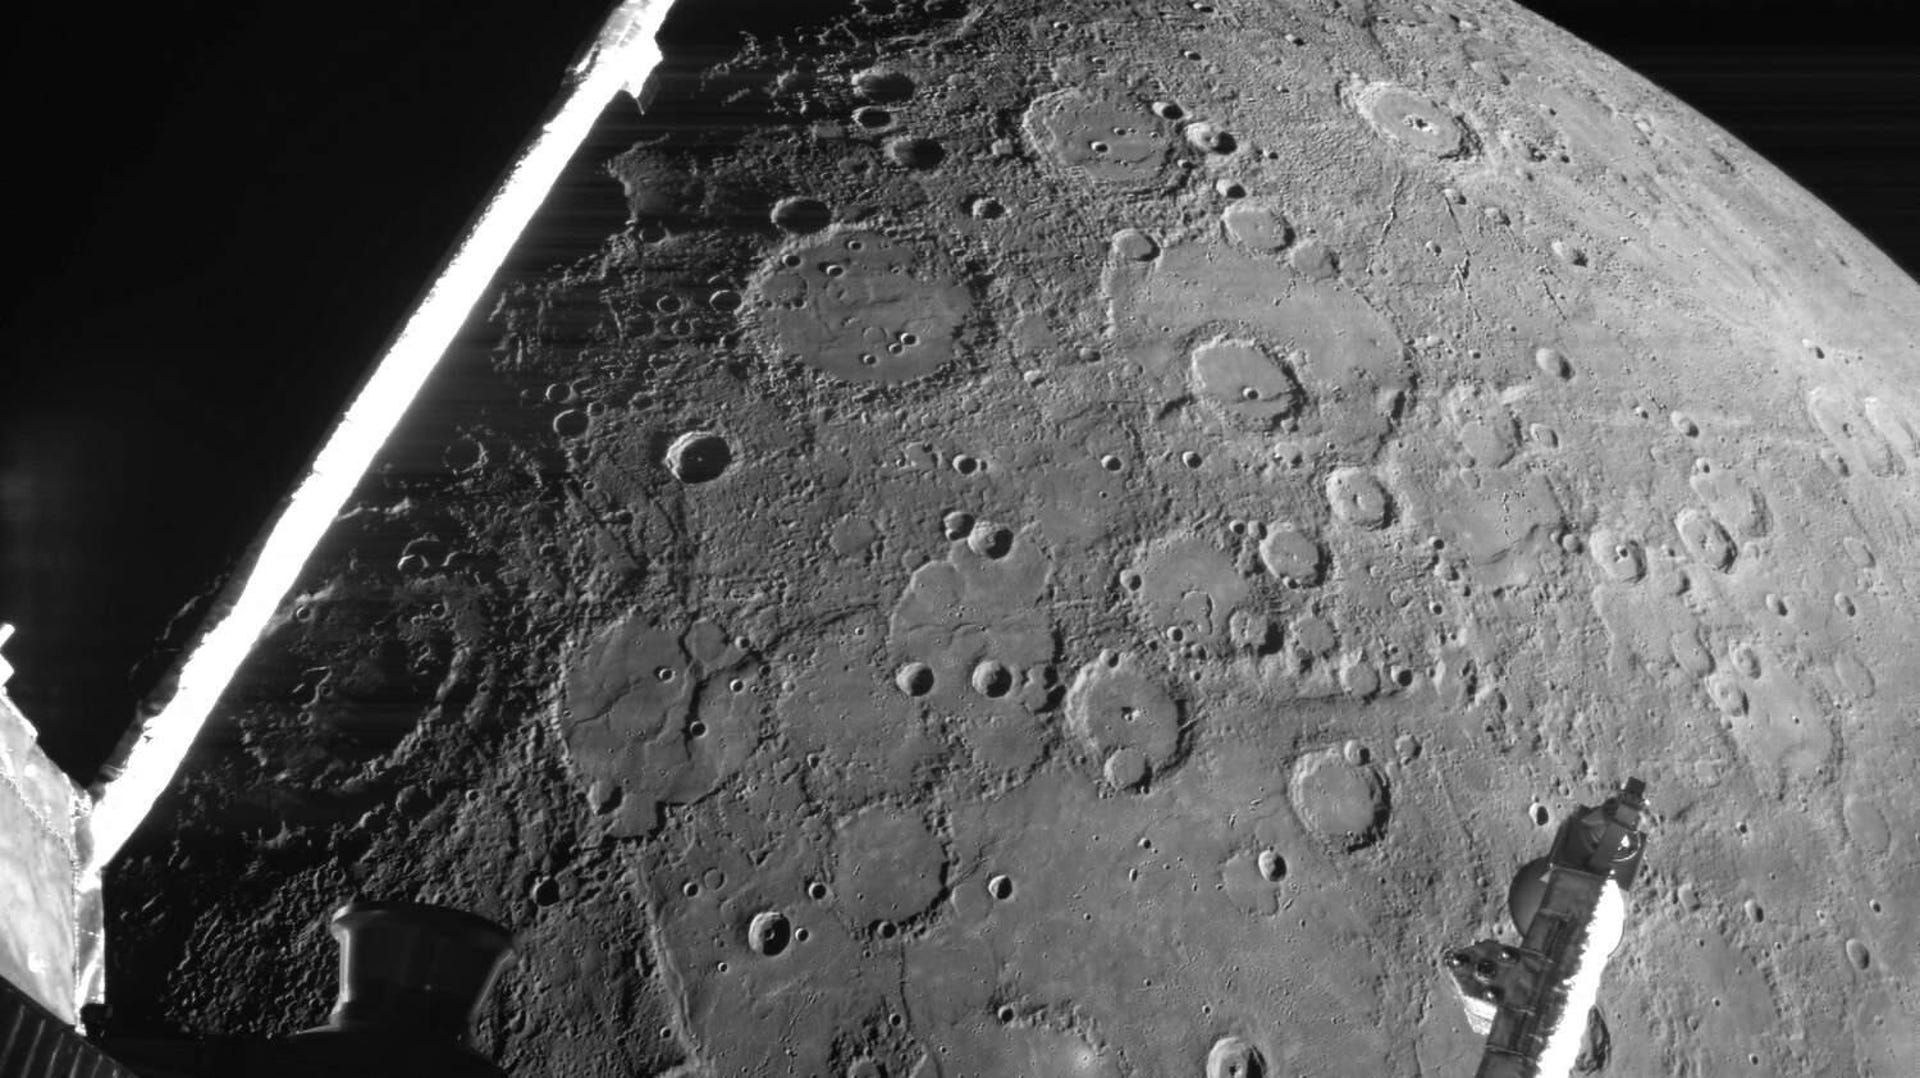 A black-and-white image of Mercury shows many craters and parts for the BepiColombo spacecraft.